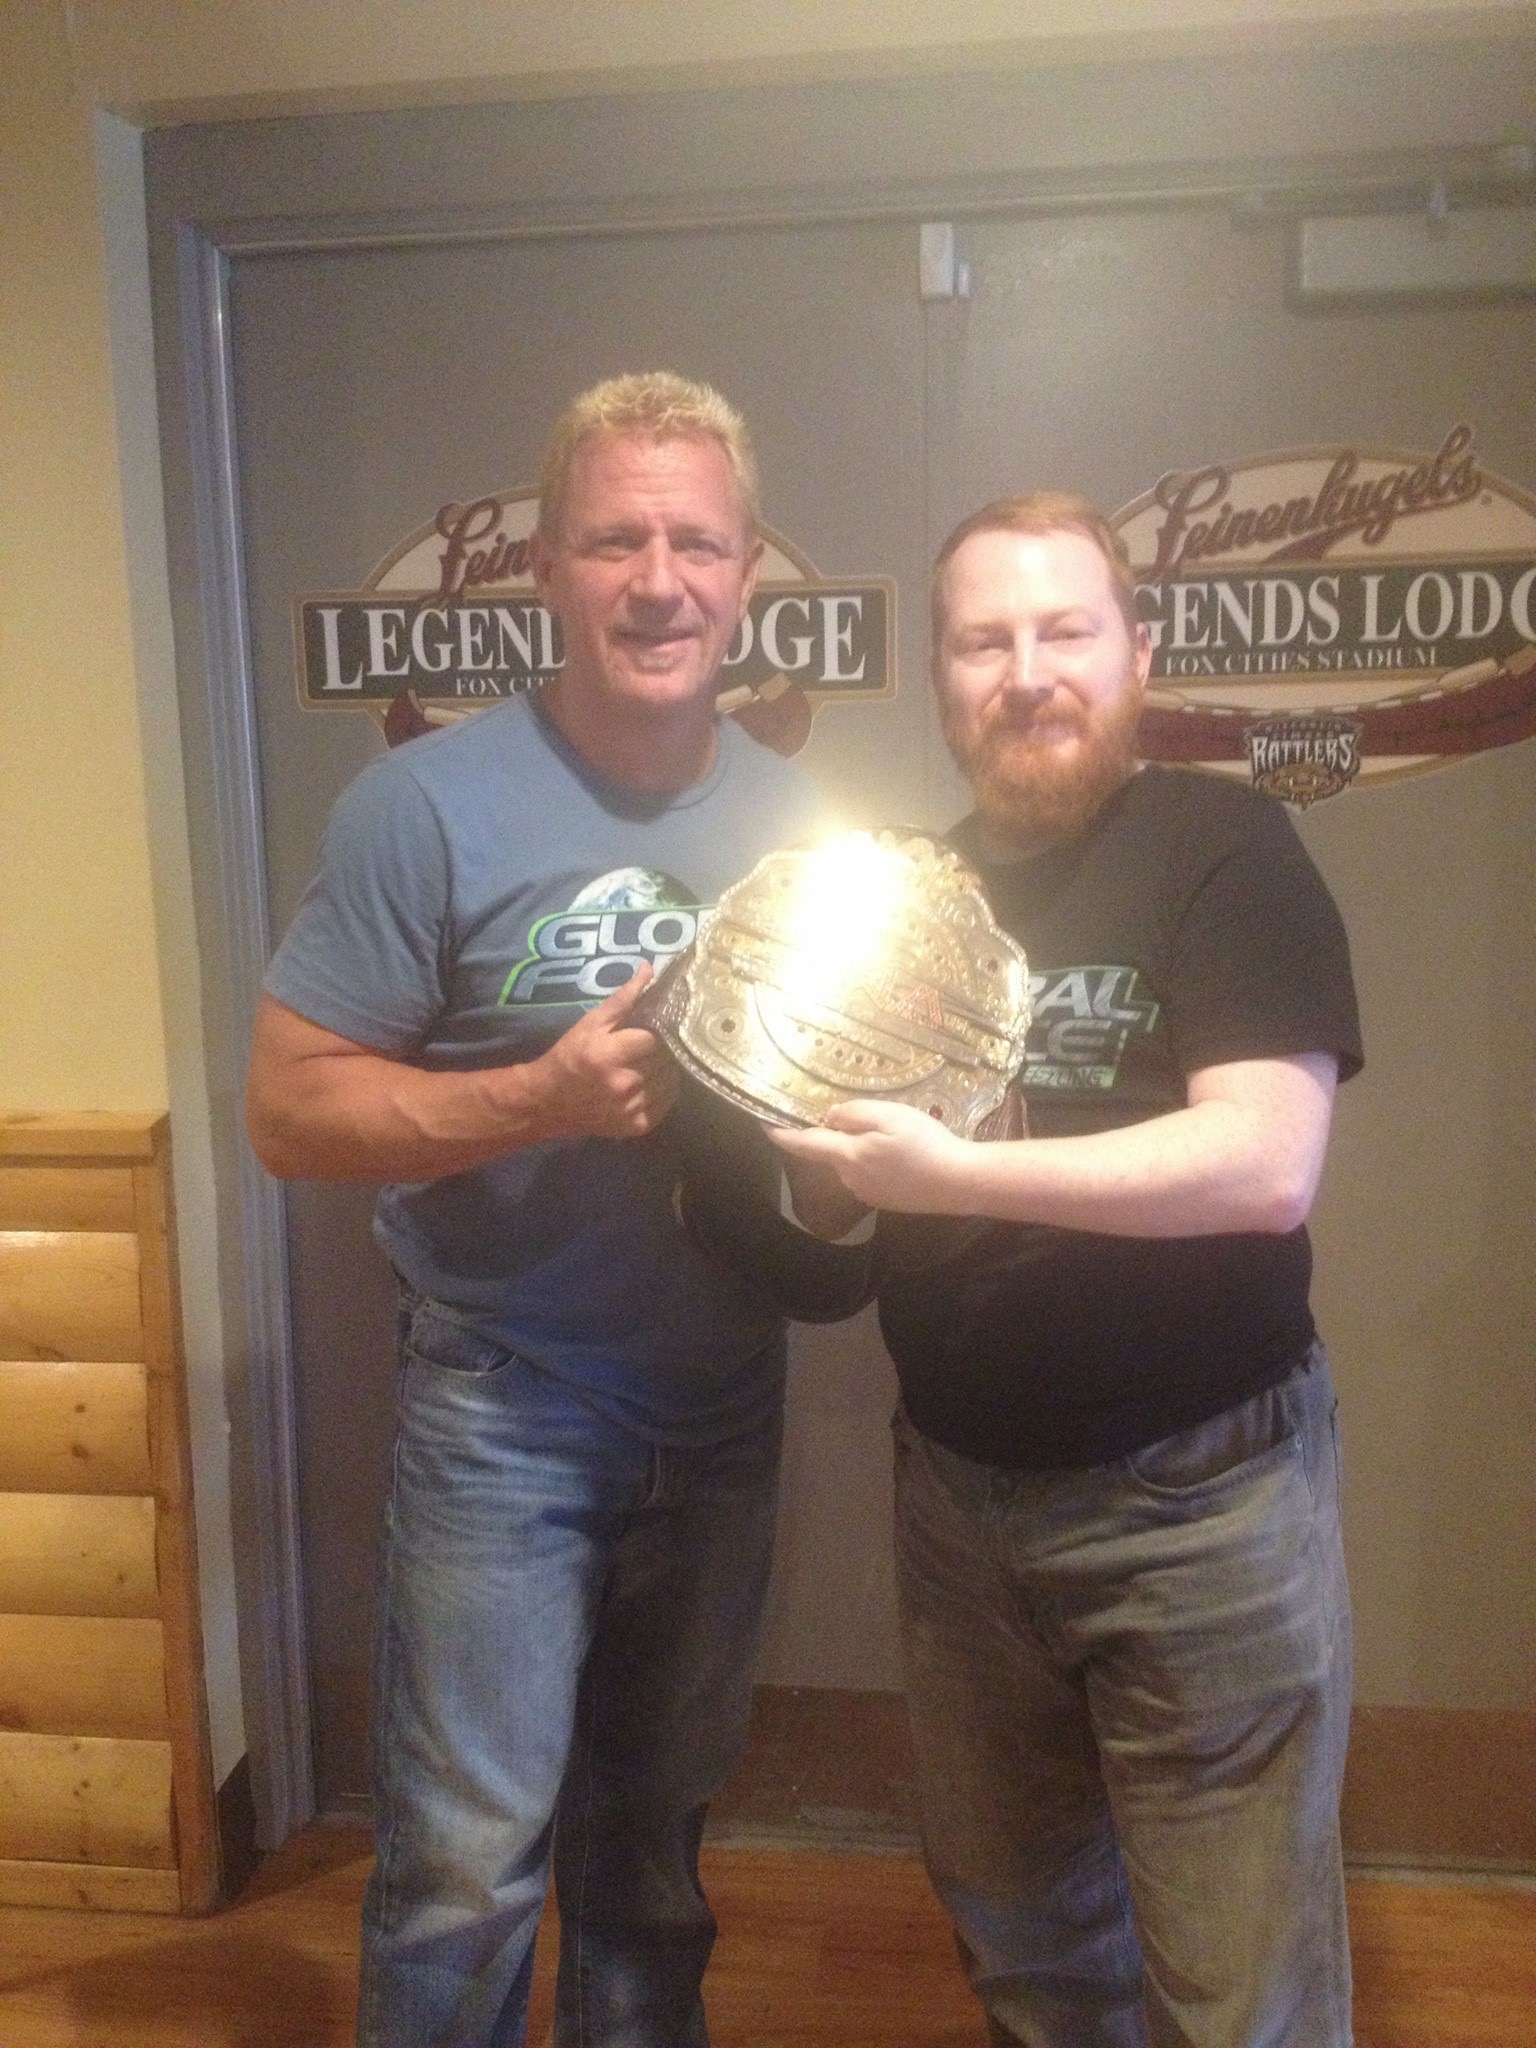 Patric J. Arnold with his idol Jeff Jarrett (Founder of GFW and TNA) with the KOTM belt.